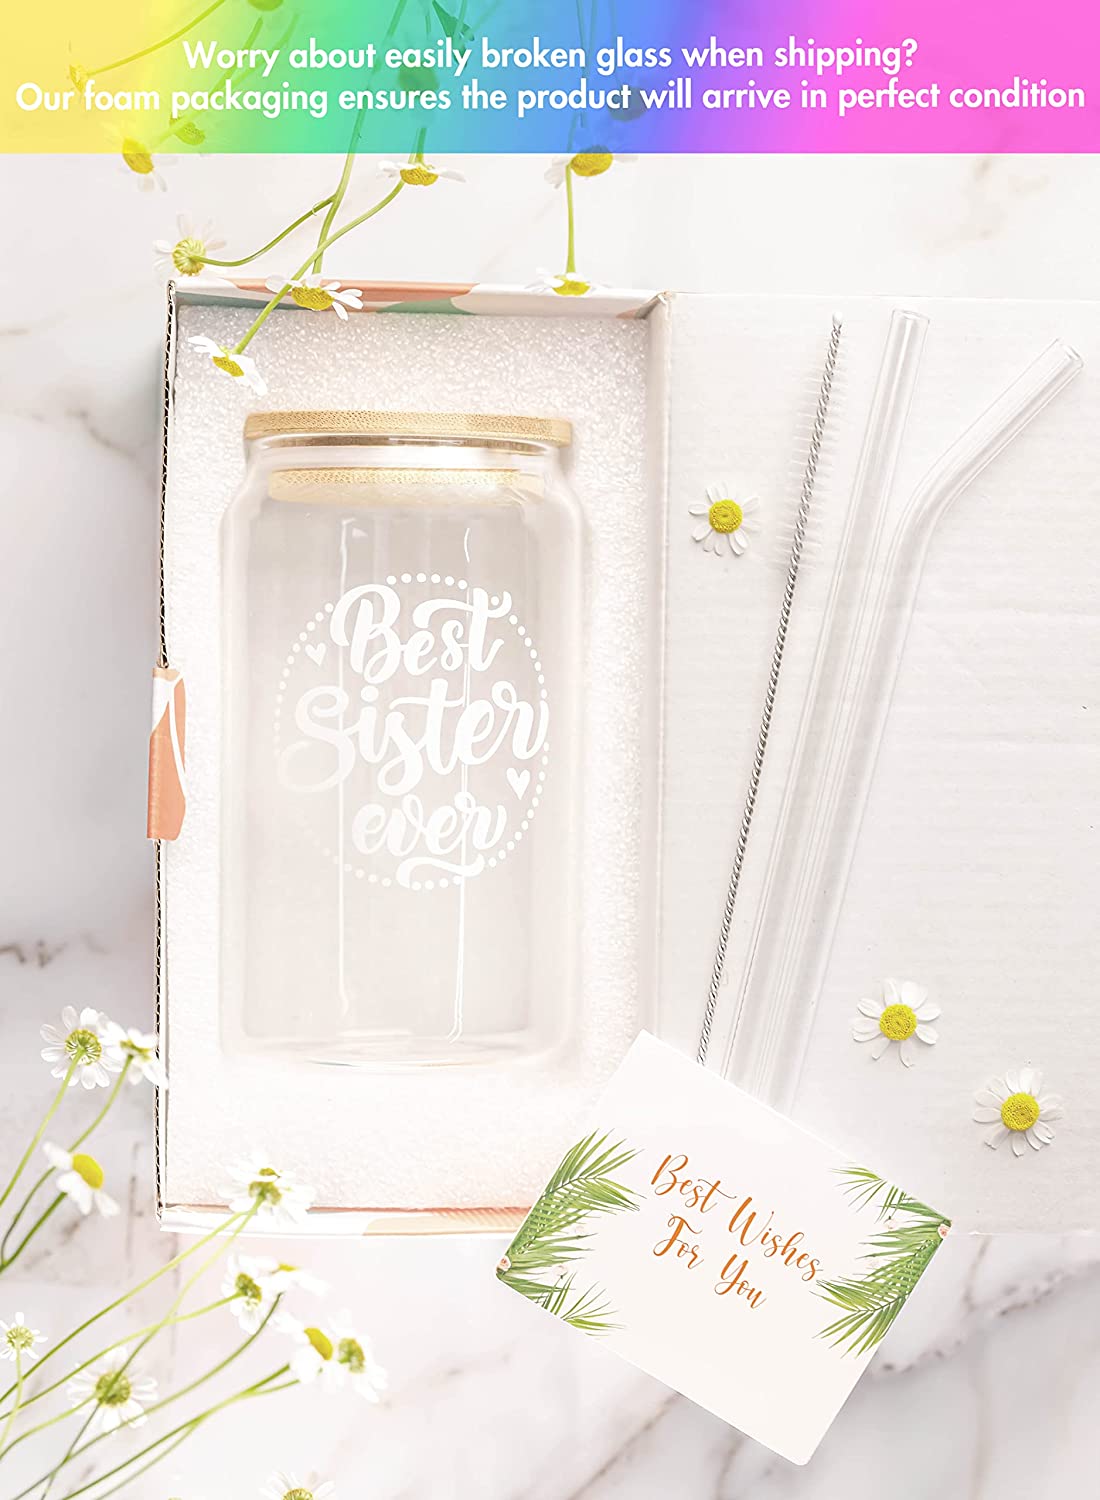 Pink Tear Bottle|Gift Ideas for Women and Girls